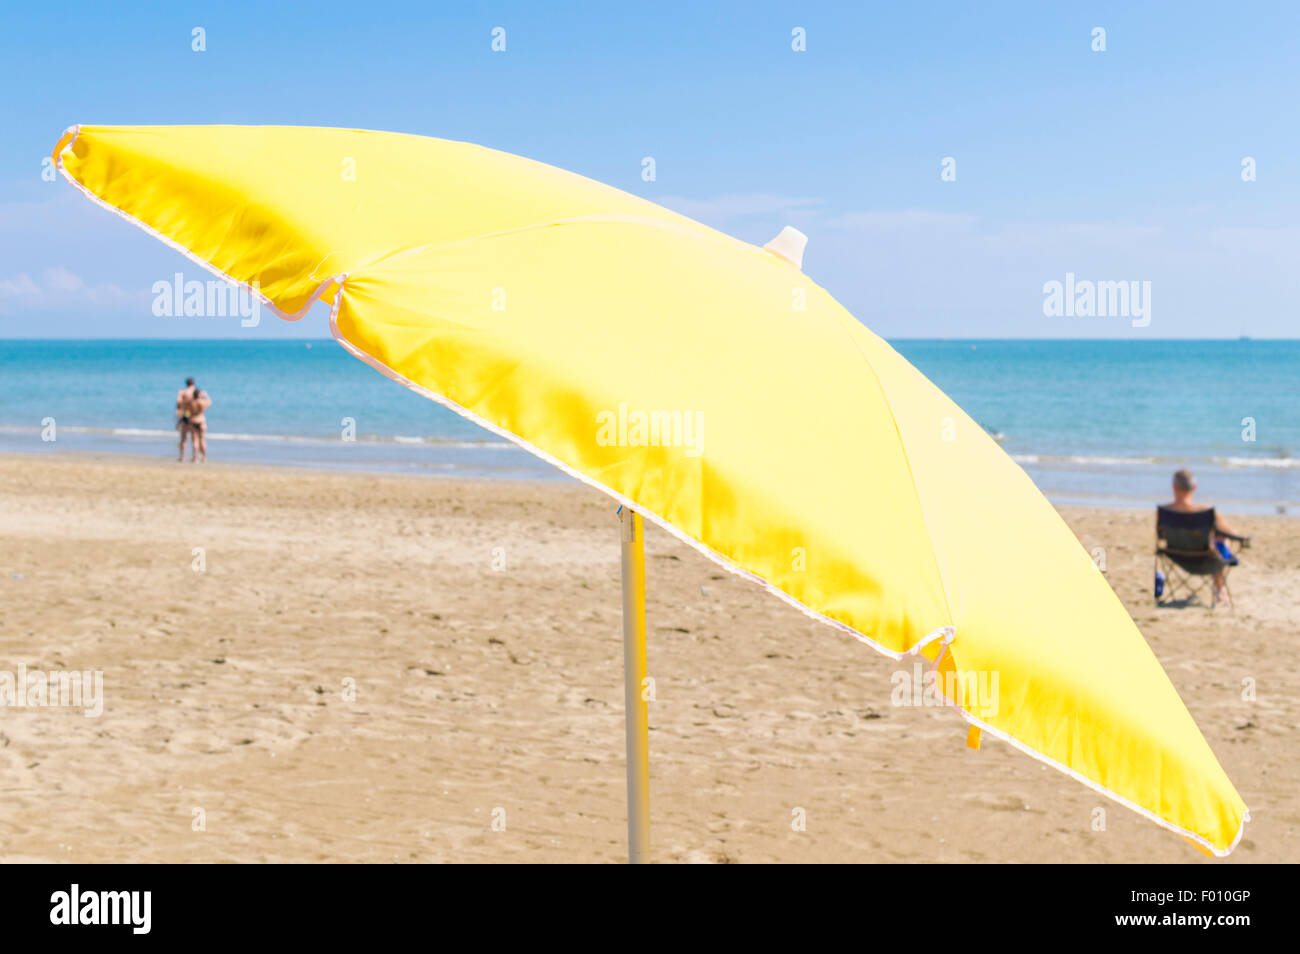 Umbrella on the beach, with the sea and sky in the background Stock Photo